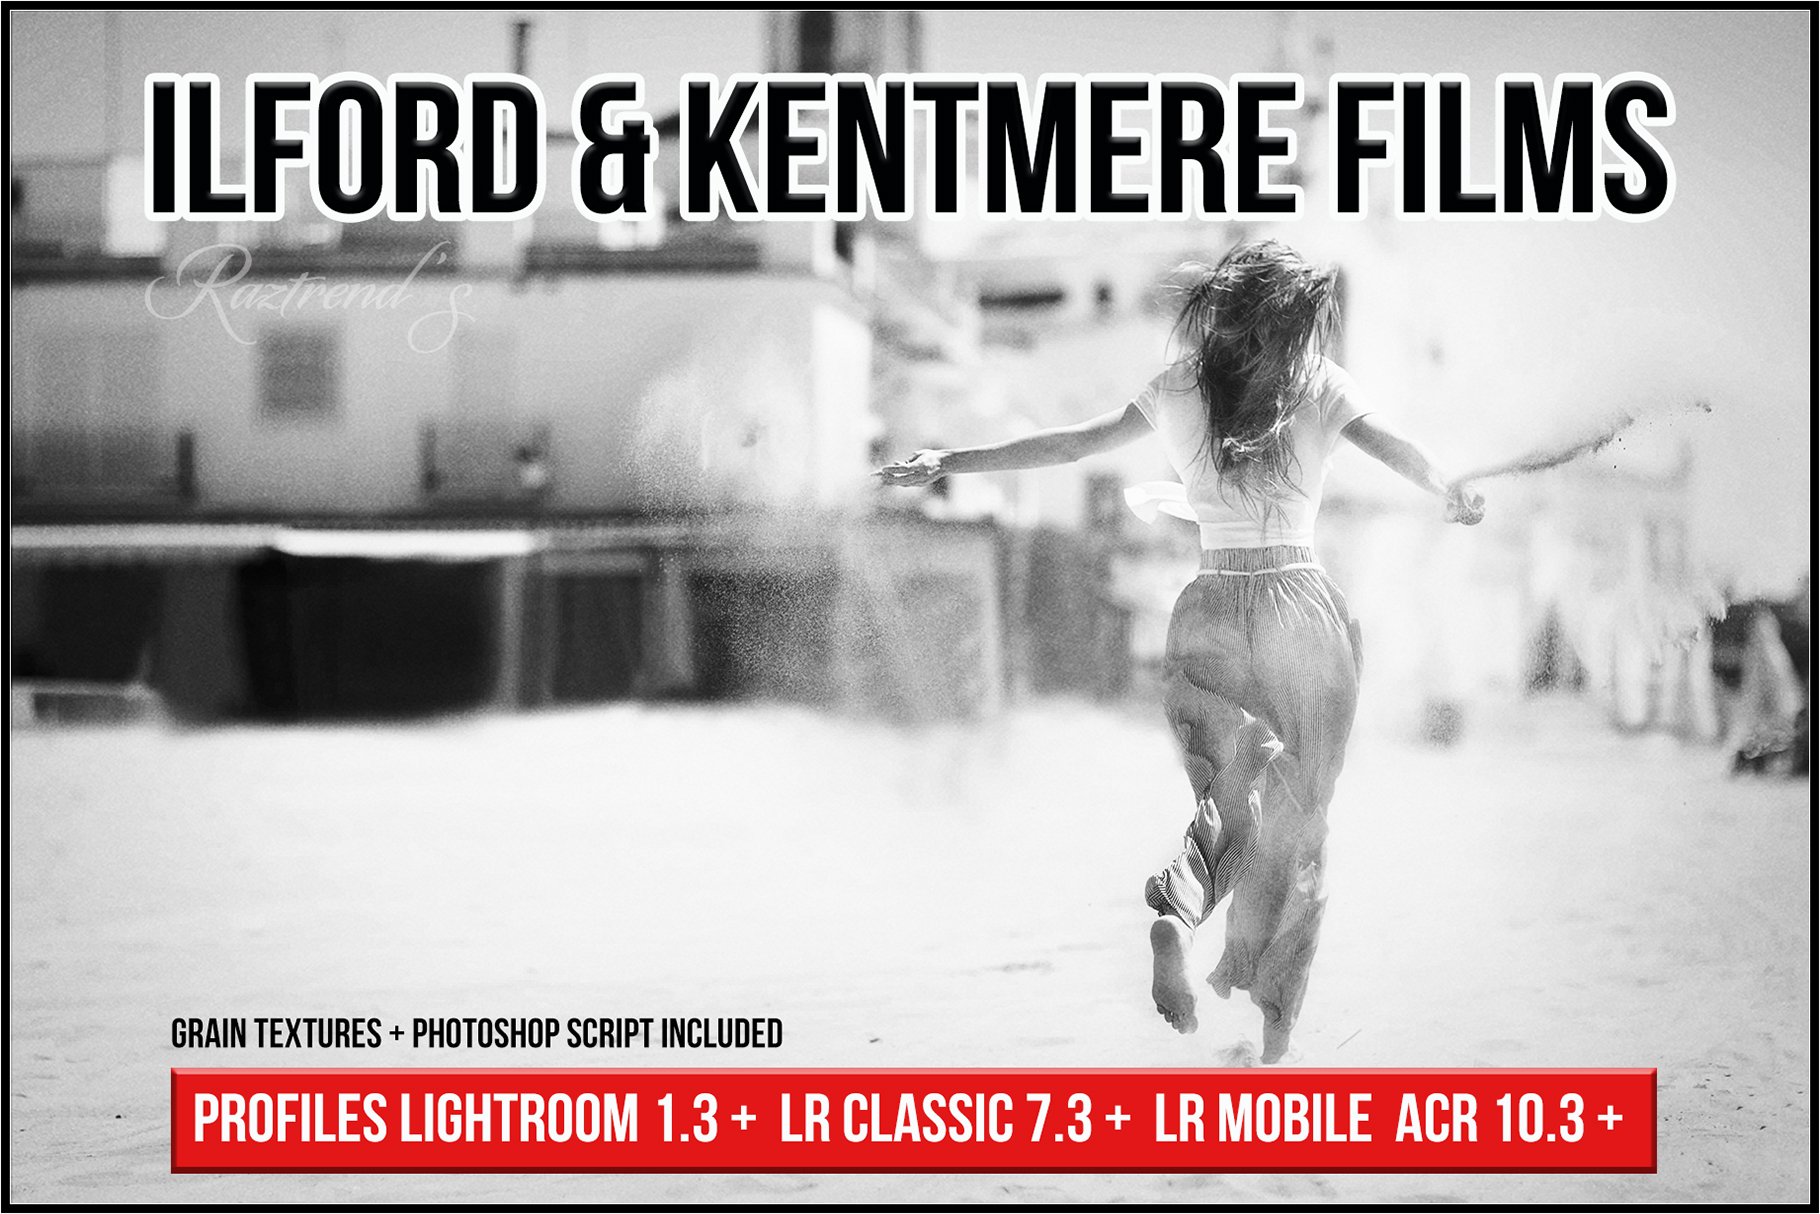 Ilford and Kentmere Films profilescover image.